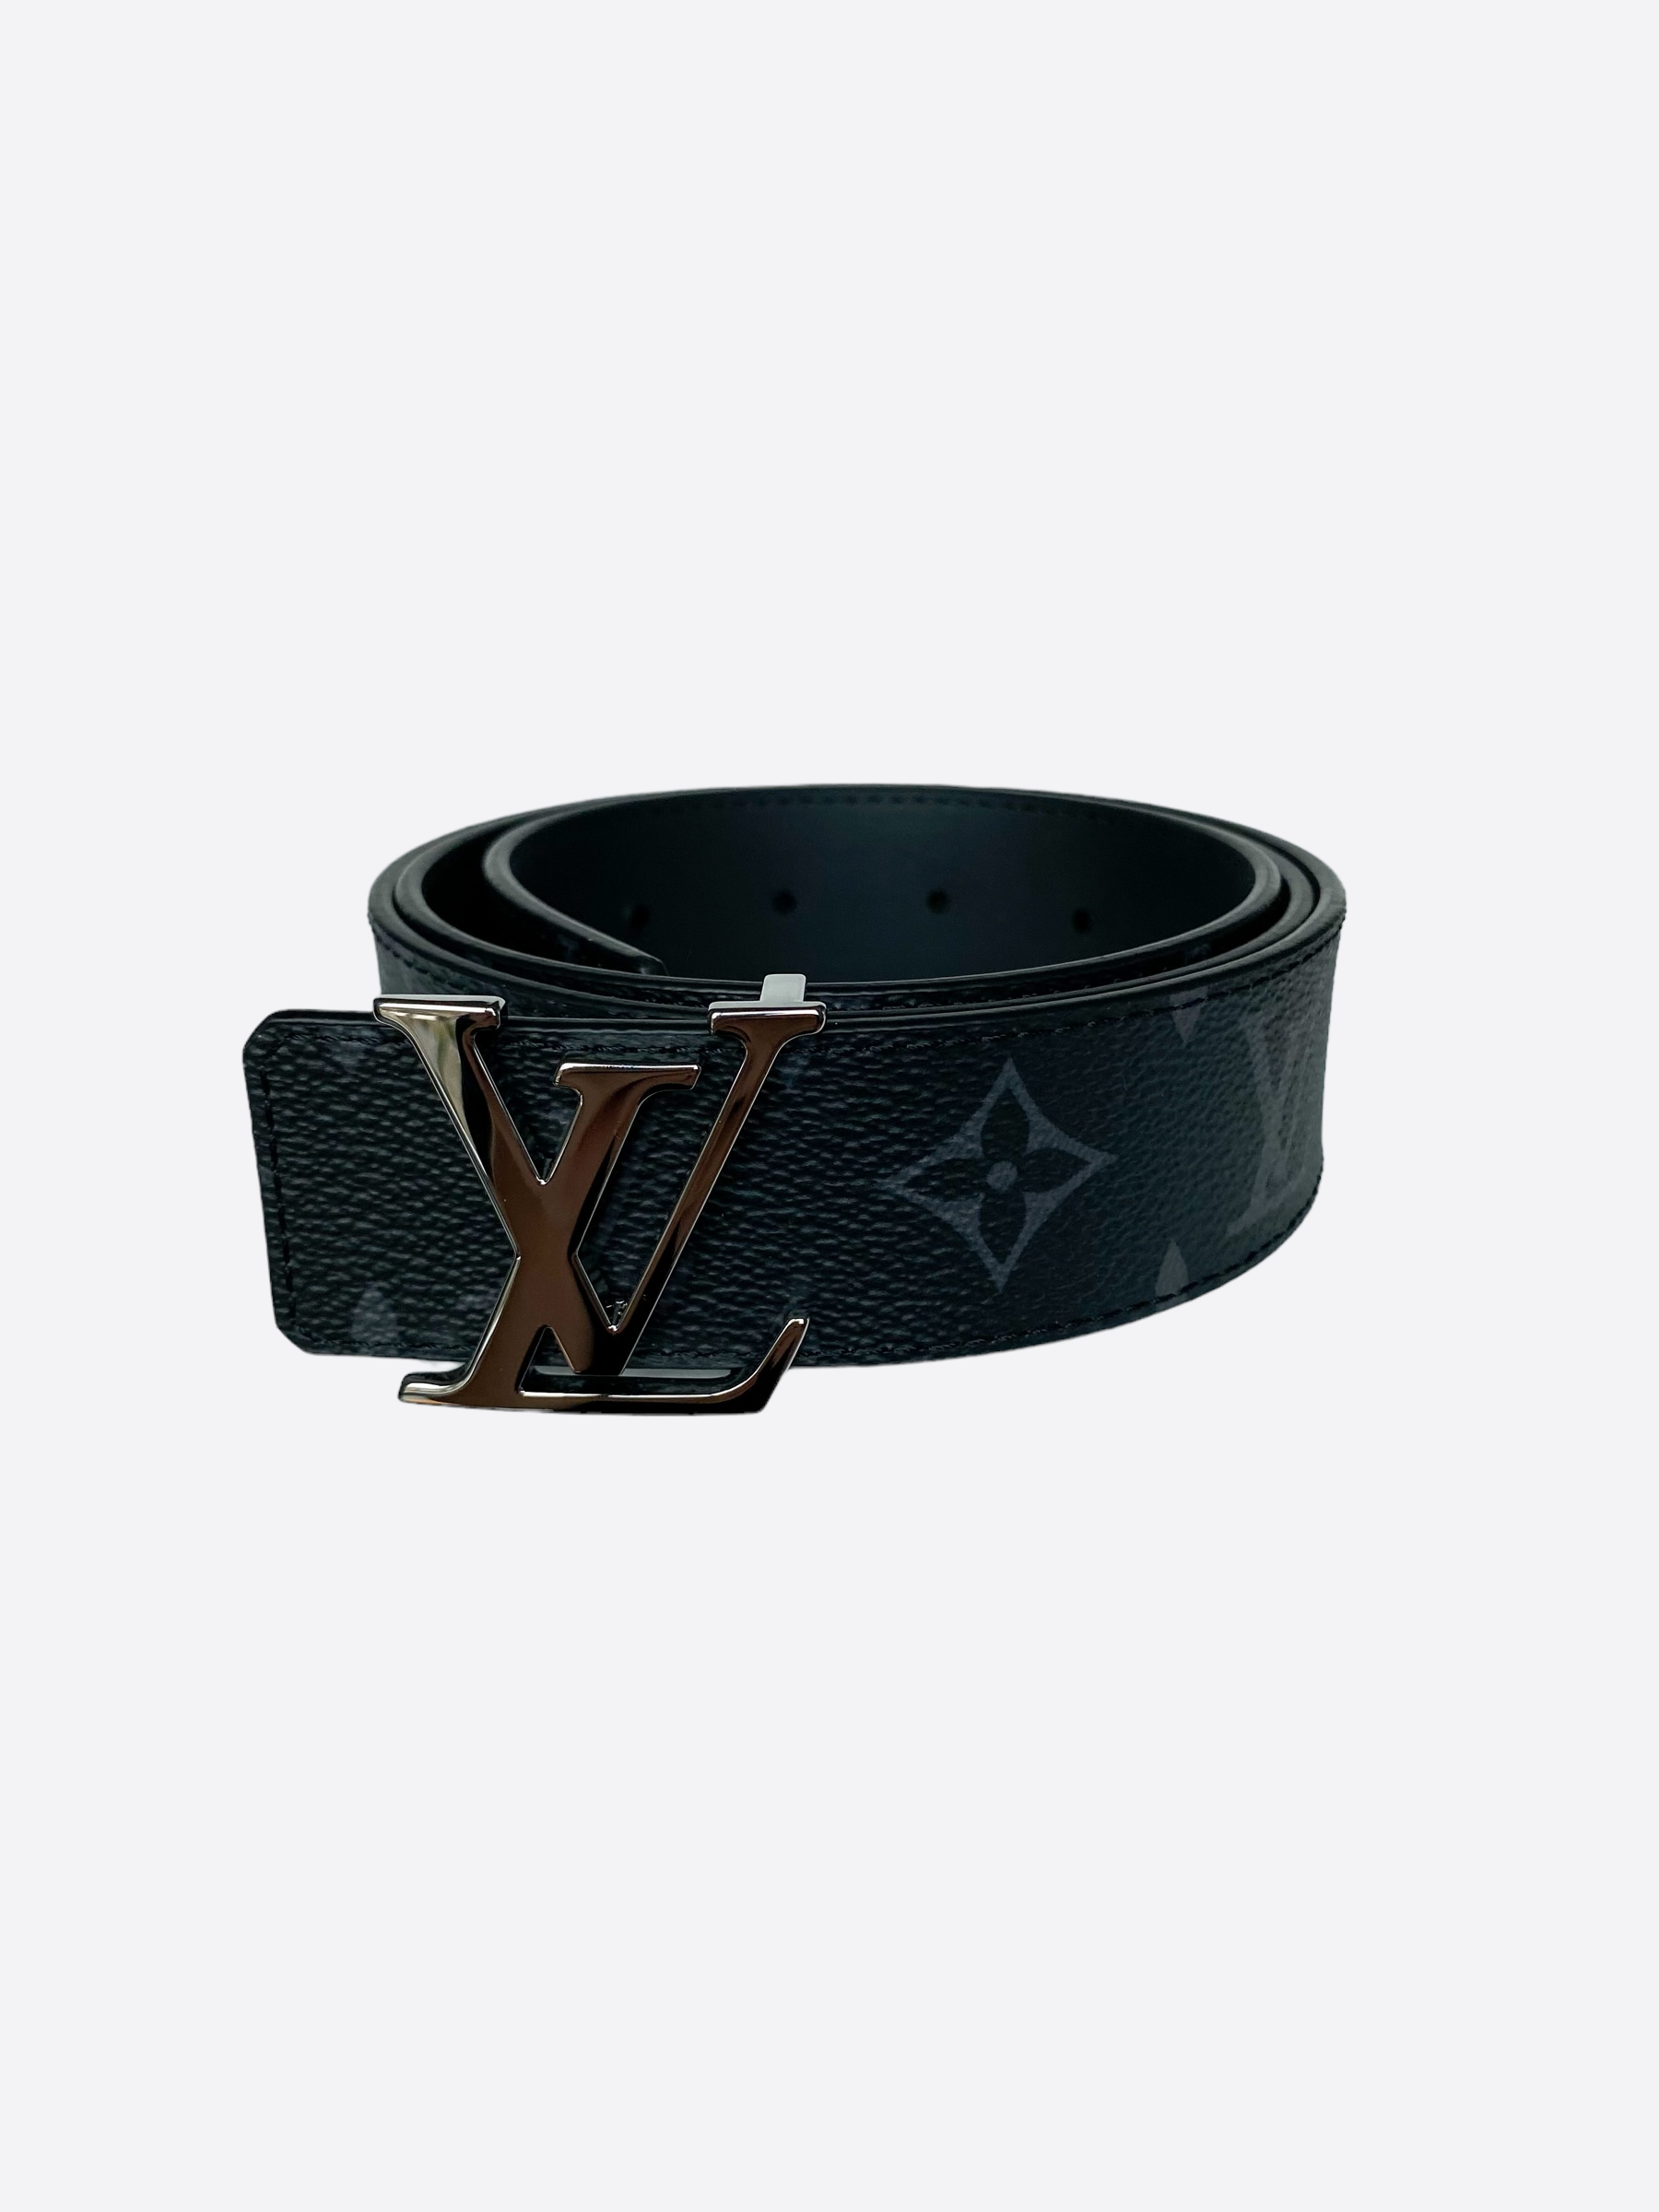 LOUIS VUITTON INITIALES 40MM REVERSIBLE MONOGRAM CANVAS BELT - B86 -  REPGOD.ORG/IS - Trusted Replica Products - ReplicaGods - REPGODS.ORG